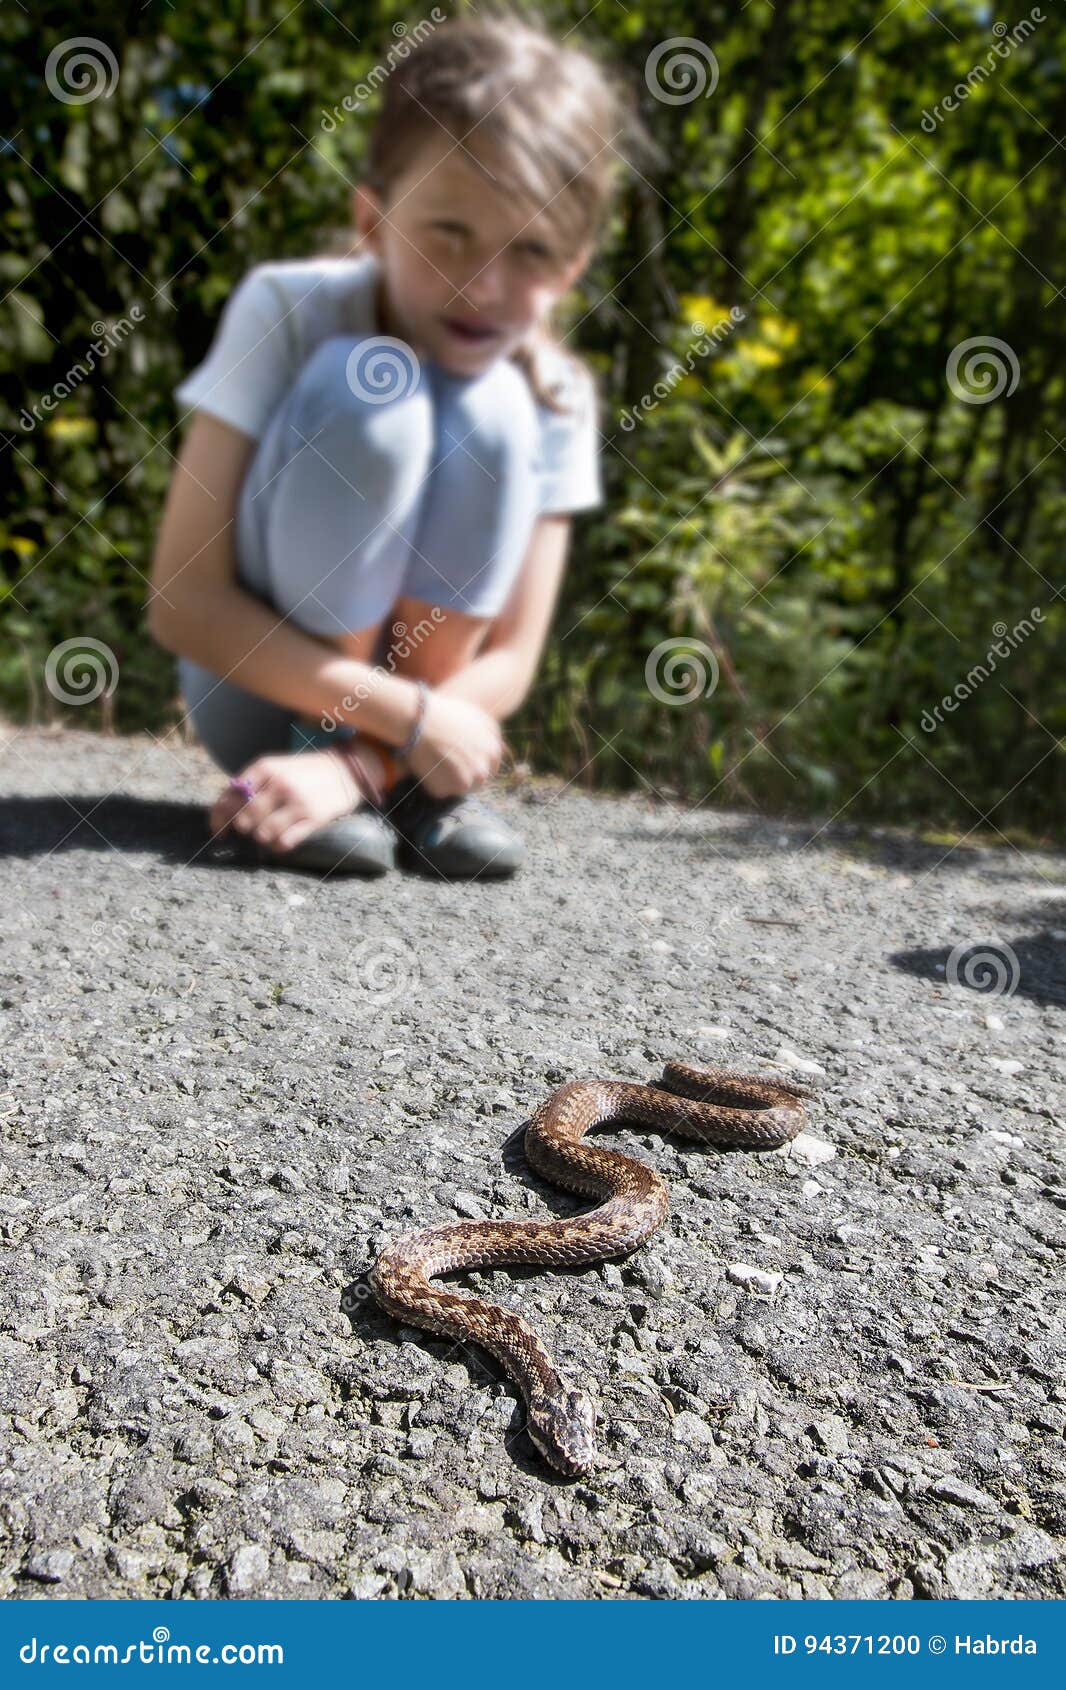 child siting close of poison snake